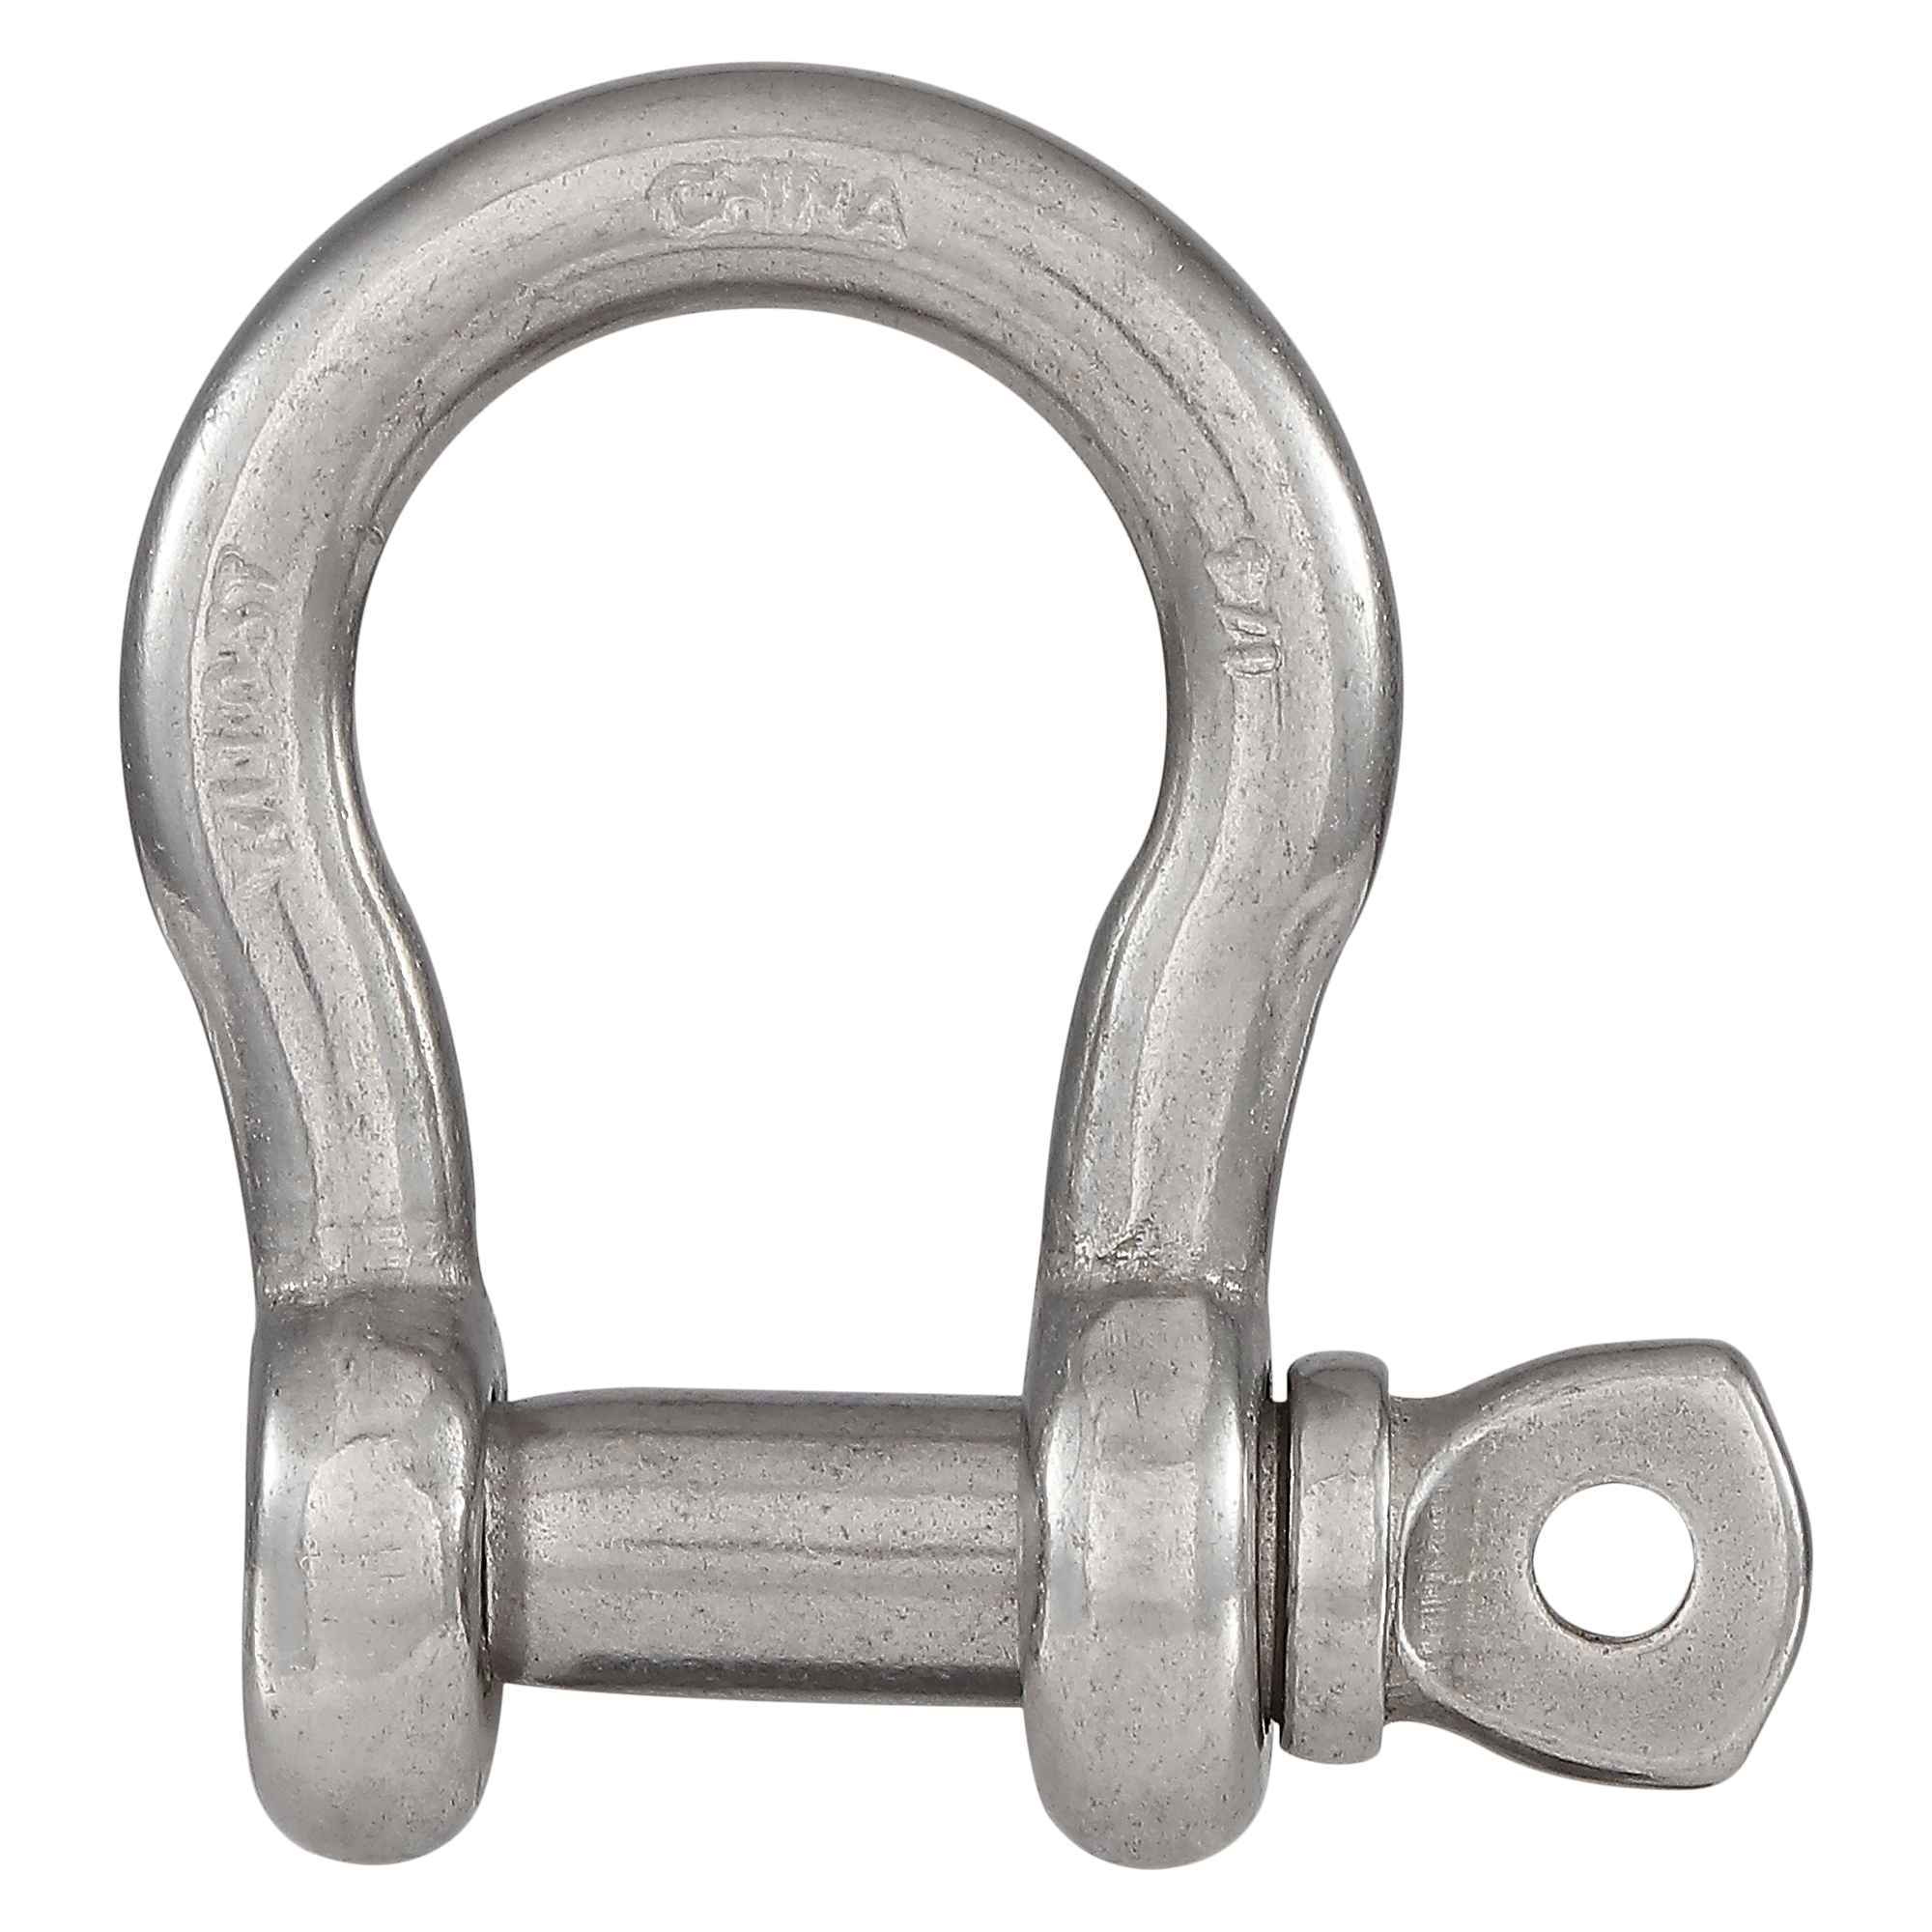 N100-278 Anchor Shackle, 1/4 in Trade, 1100 lb Working Load, 1/4 in Dia Wire, 316 Grade